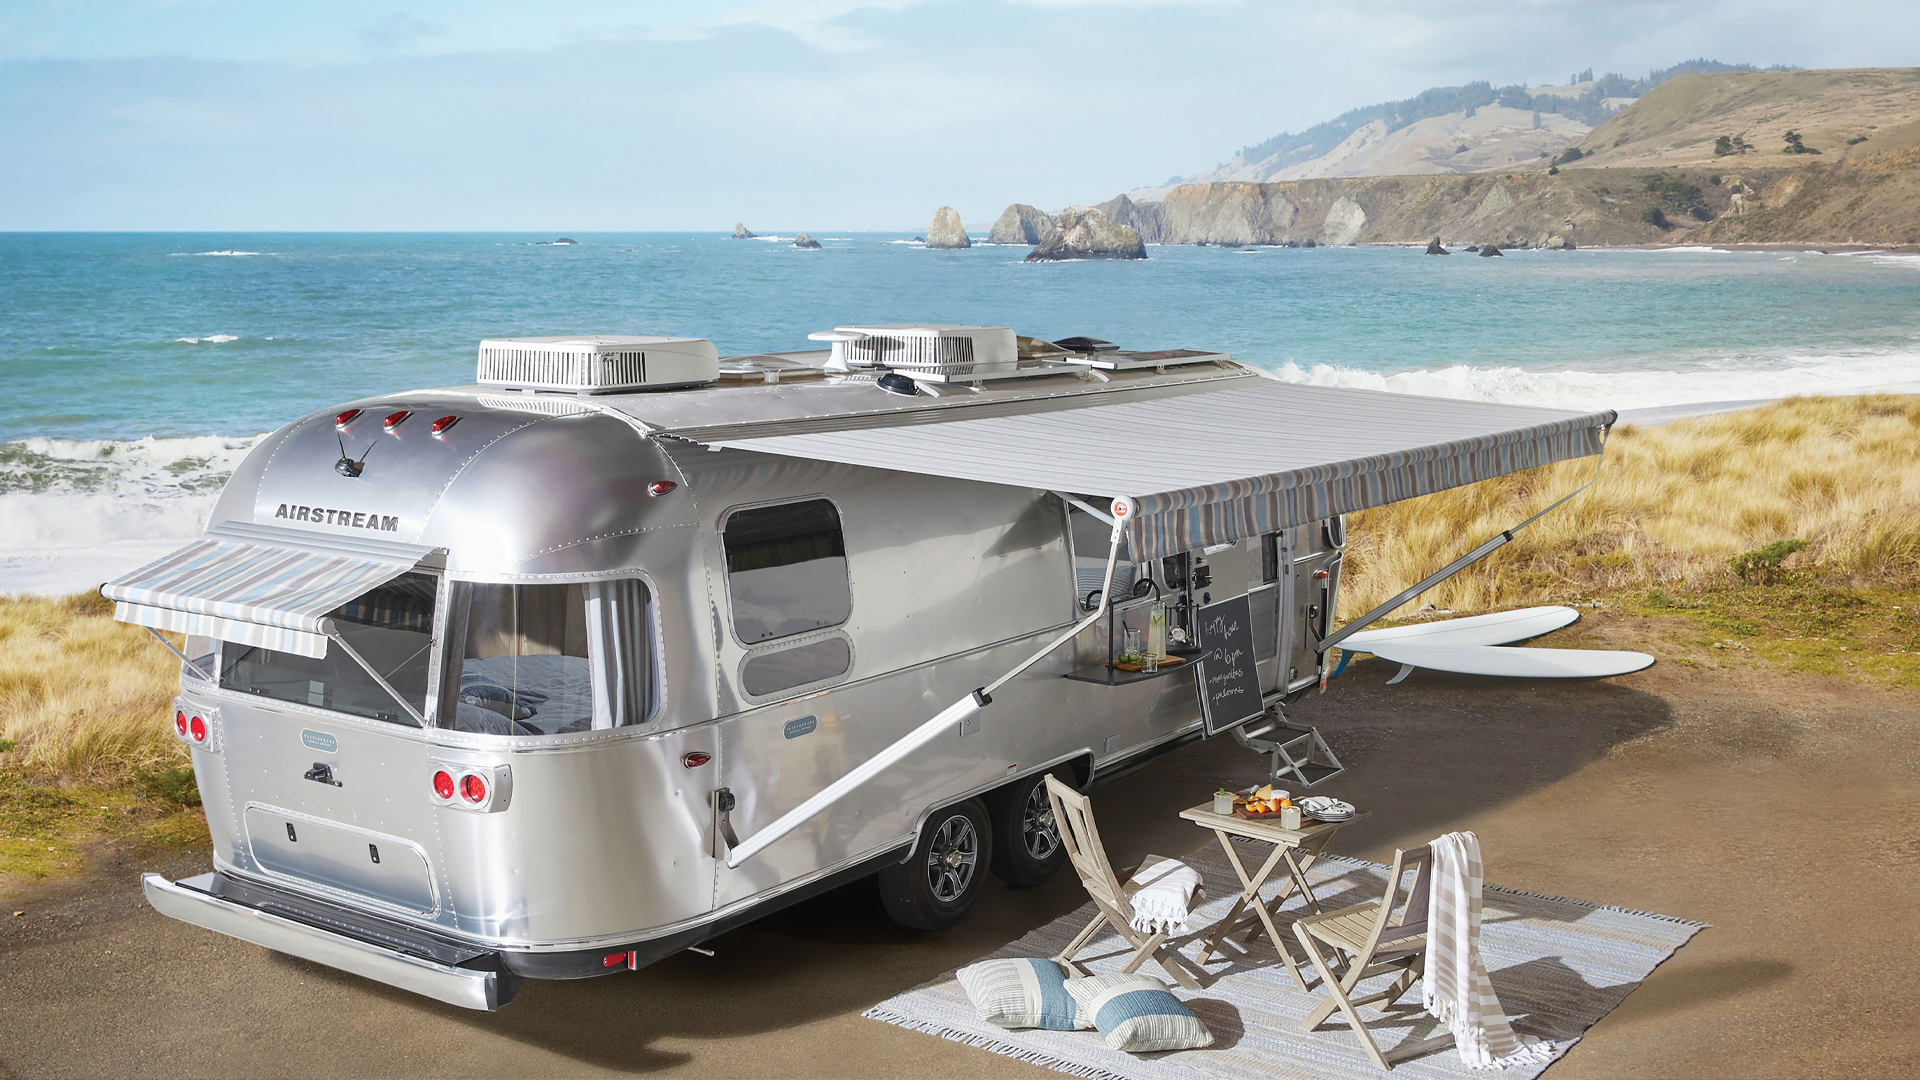 Airstream Pottery Barn Special Edition Travel Trailer in Malibu on the beach